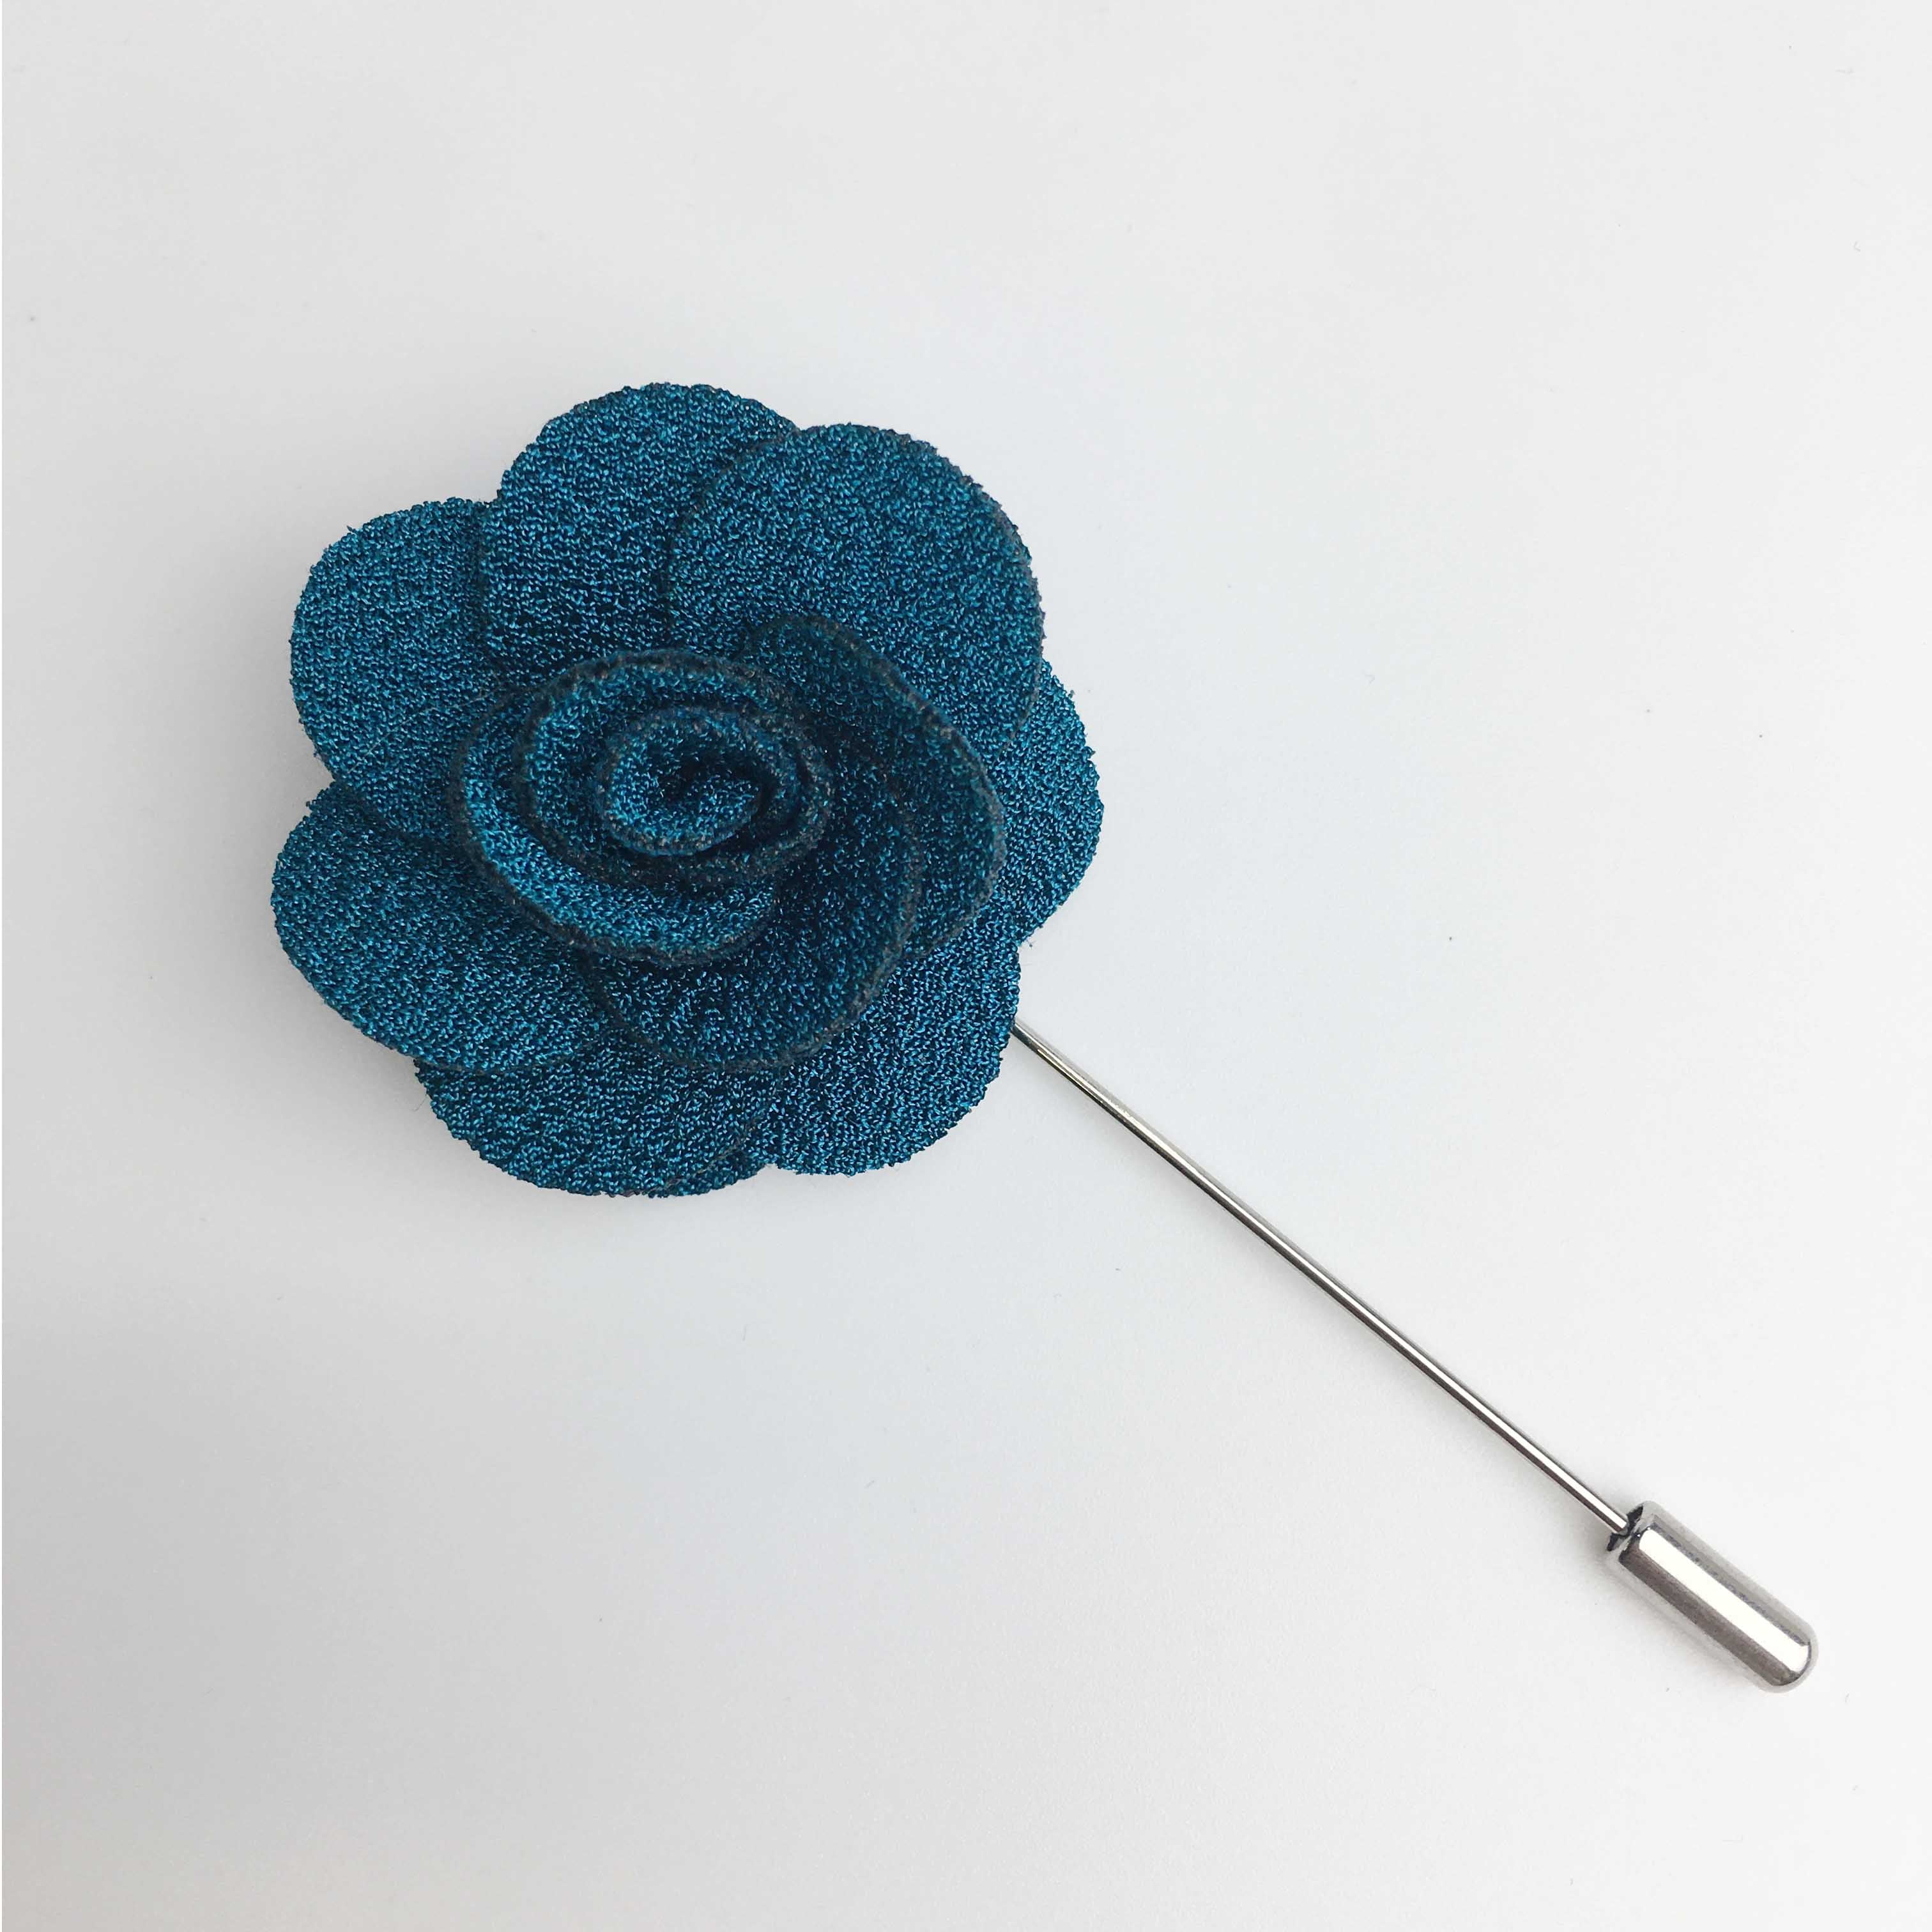 Clark Floral Lapel Pin in Teal